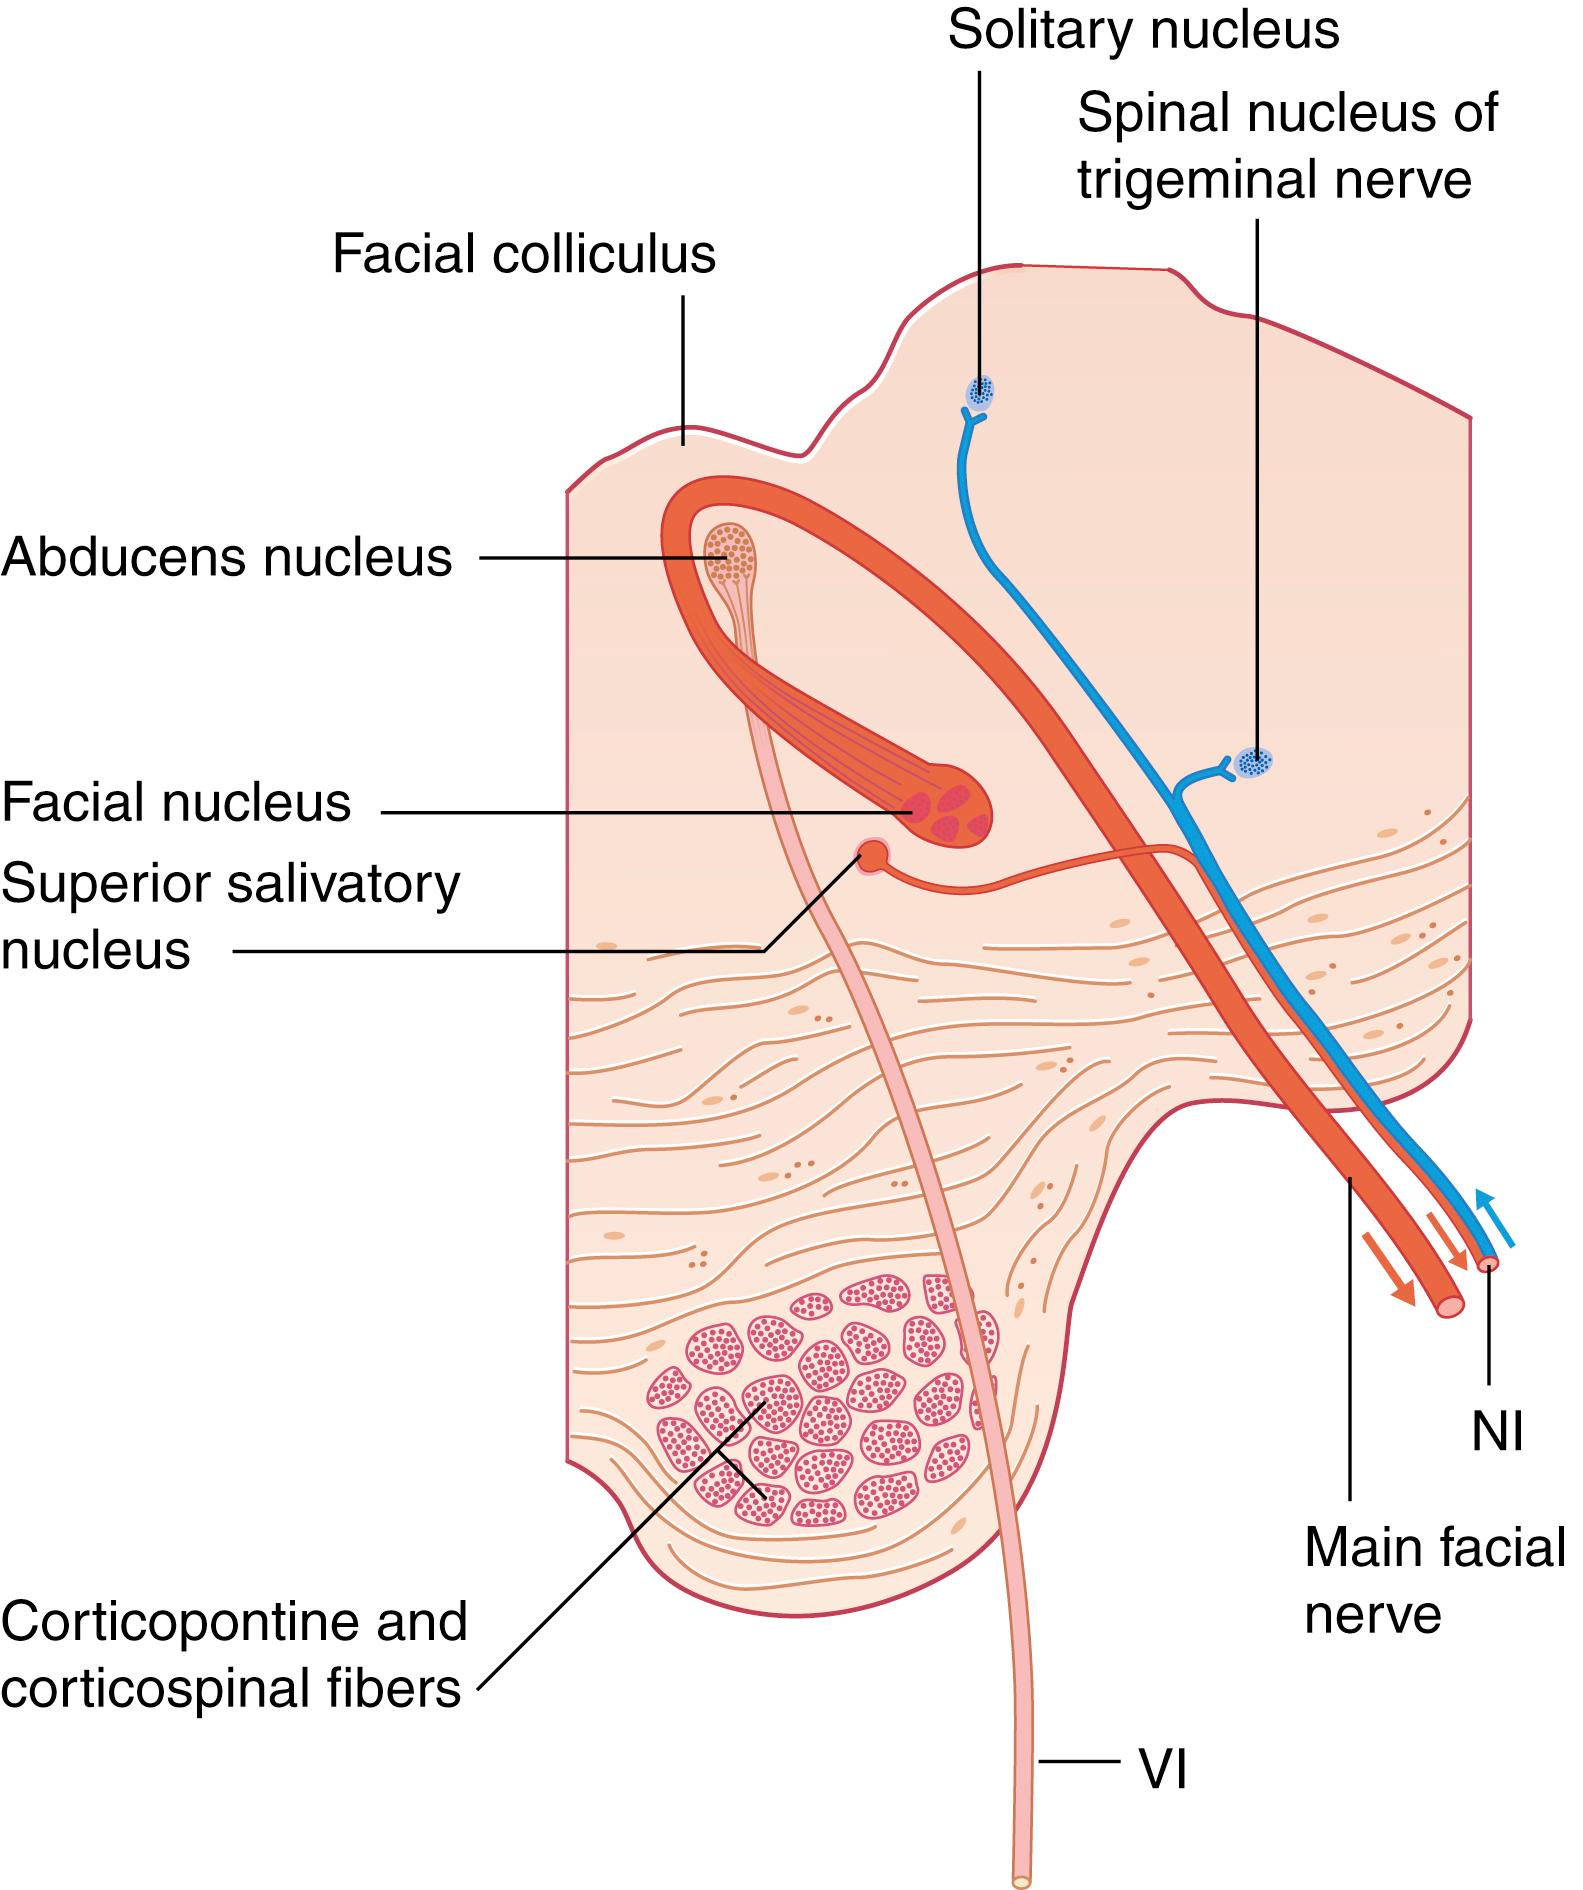 Fig. 1.2, Transverse section of the brainstem showing the intrapontine course of the facial nerve from the facial motor nucleus, superior salivatory nucleus, and solitary nucleus. NI, Nervus intermedius.